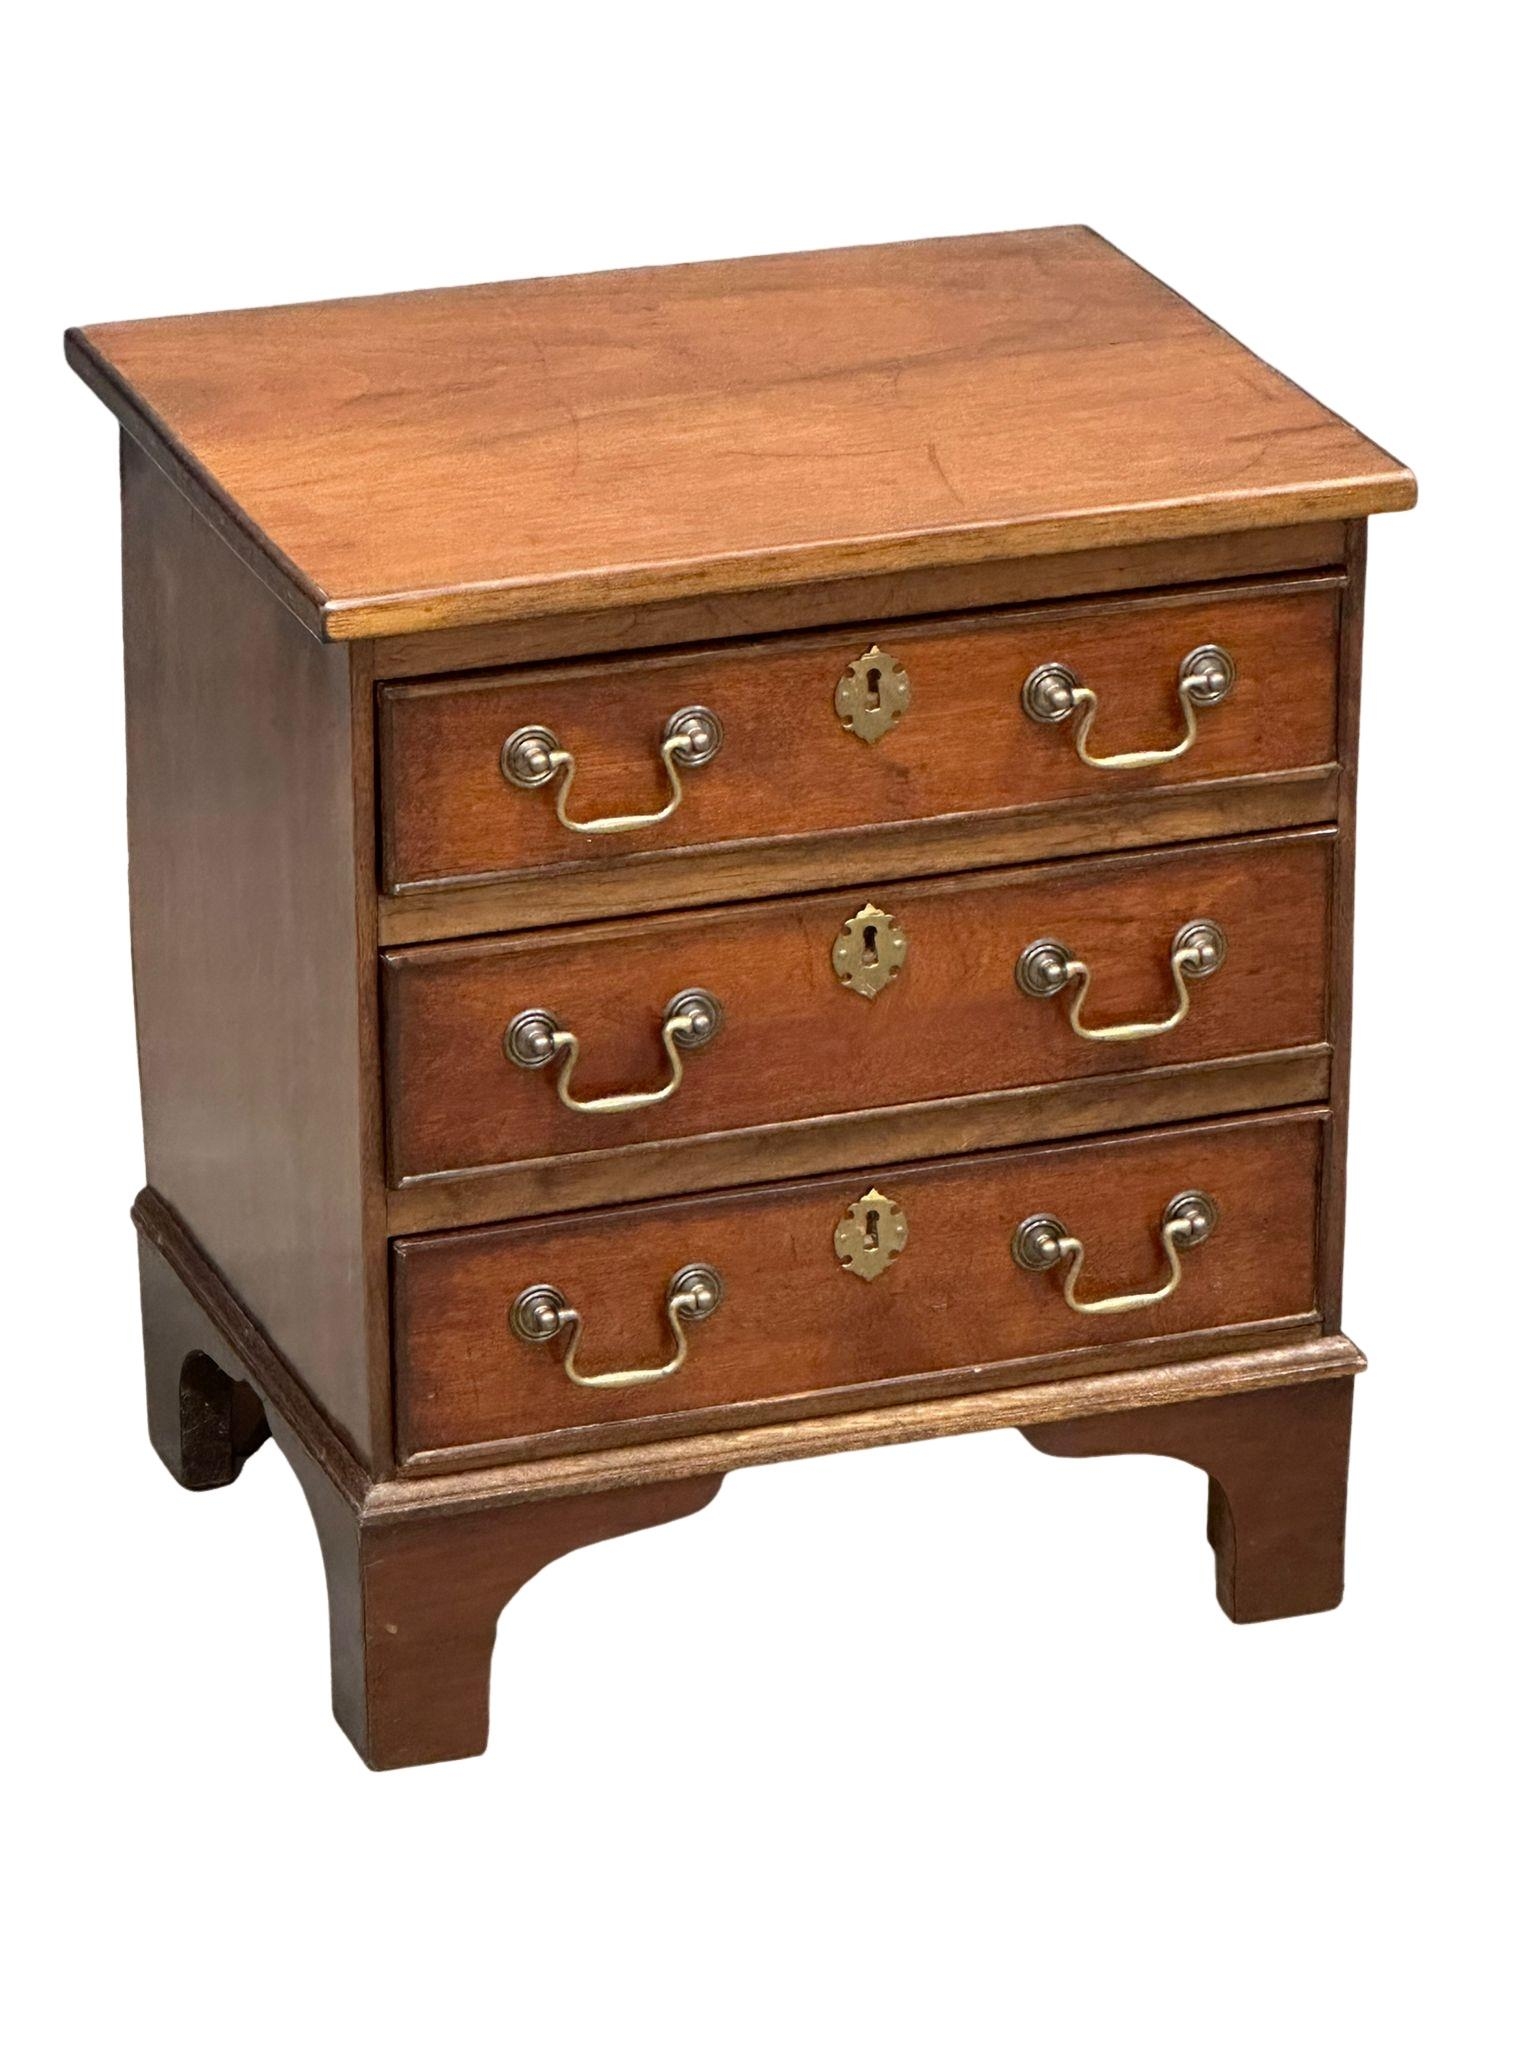 A small Georgian style chest of drawers, 46cm x 36cm x 52cm - Image 2 of 8